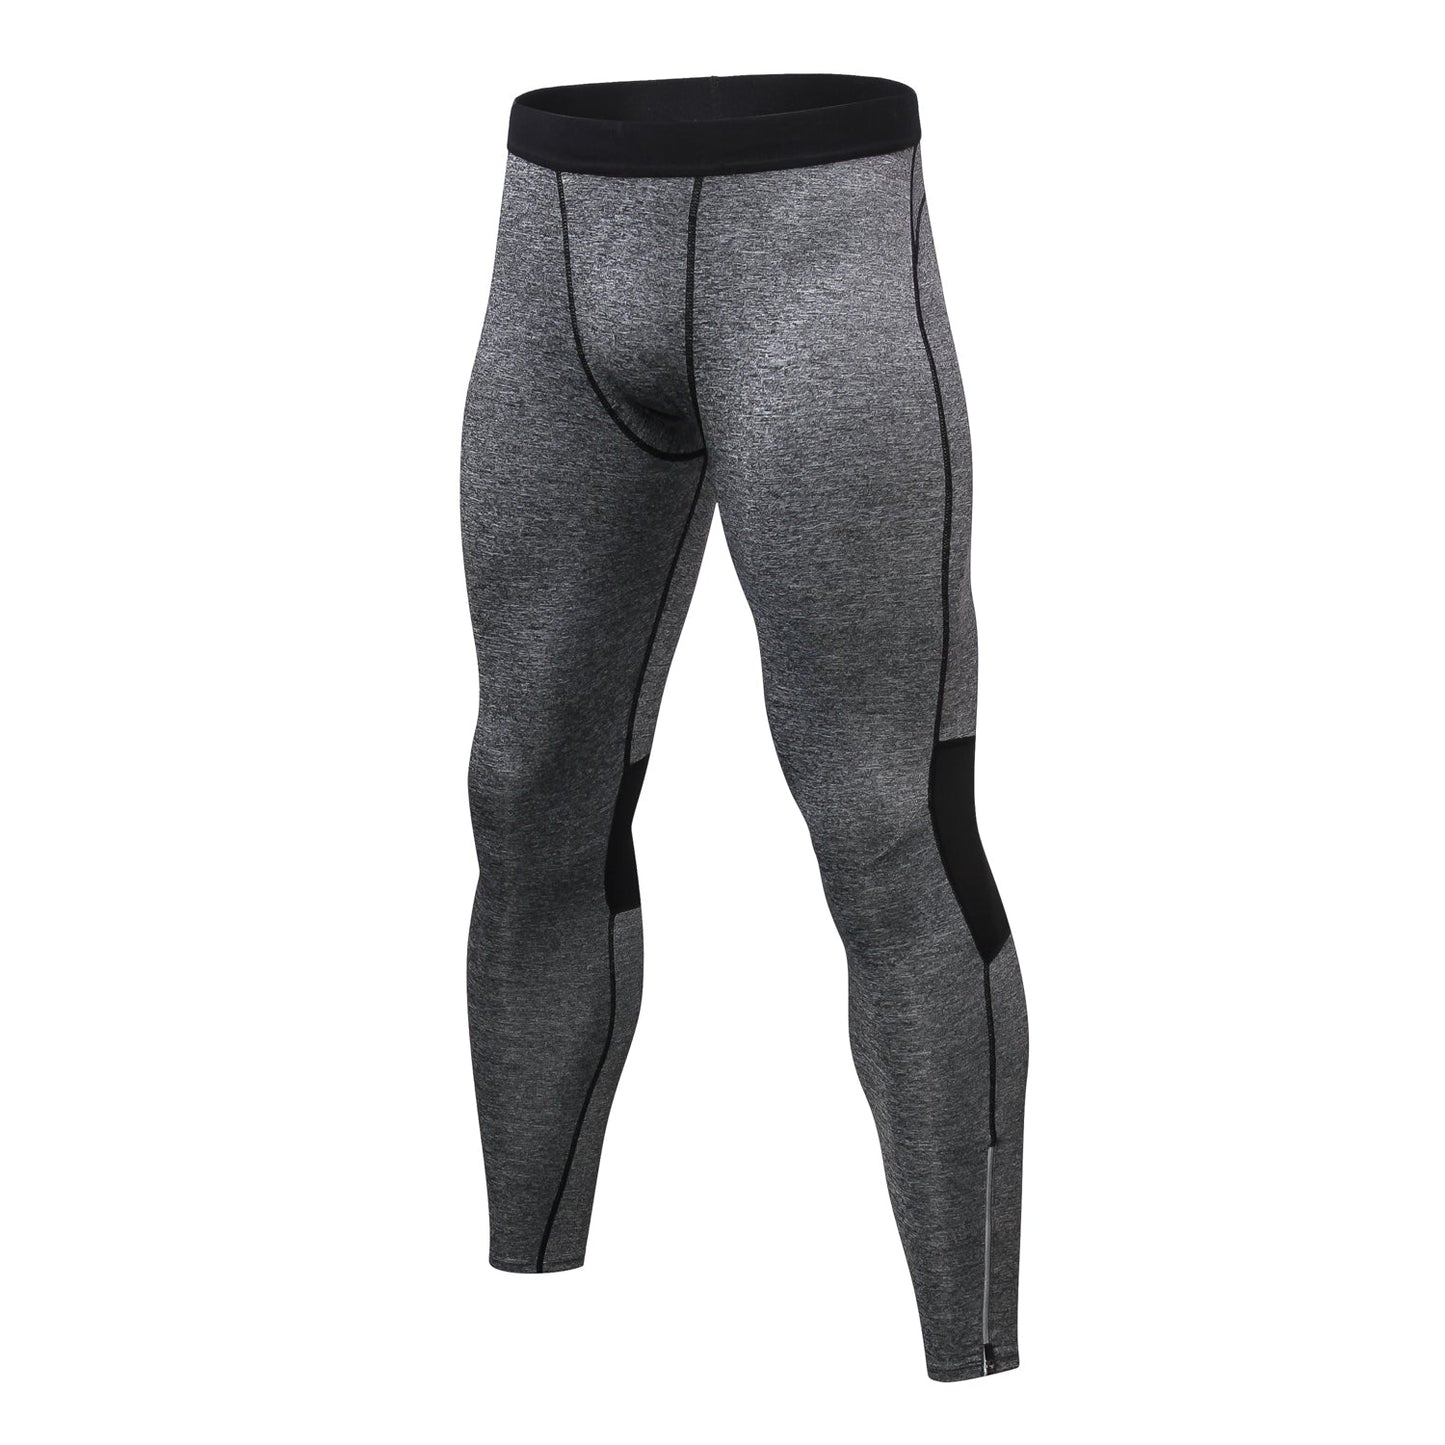 Mens Compression Pants Waist Elastic Ankle Zip Leggings Running Workout Sports Yoga Tights Athletic Activewear Baselayer LANBAOSI